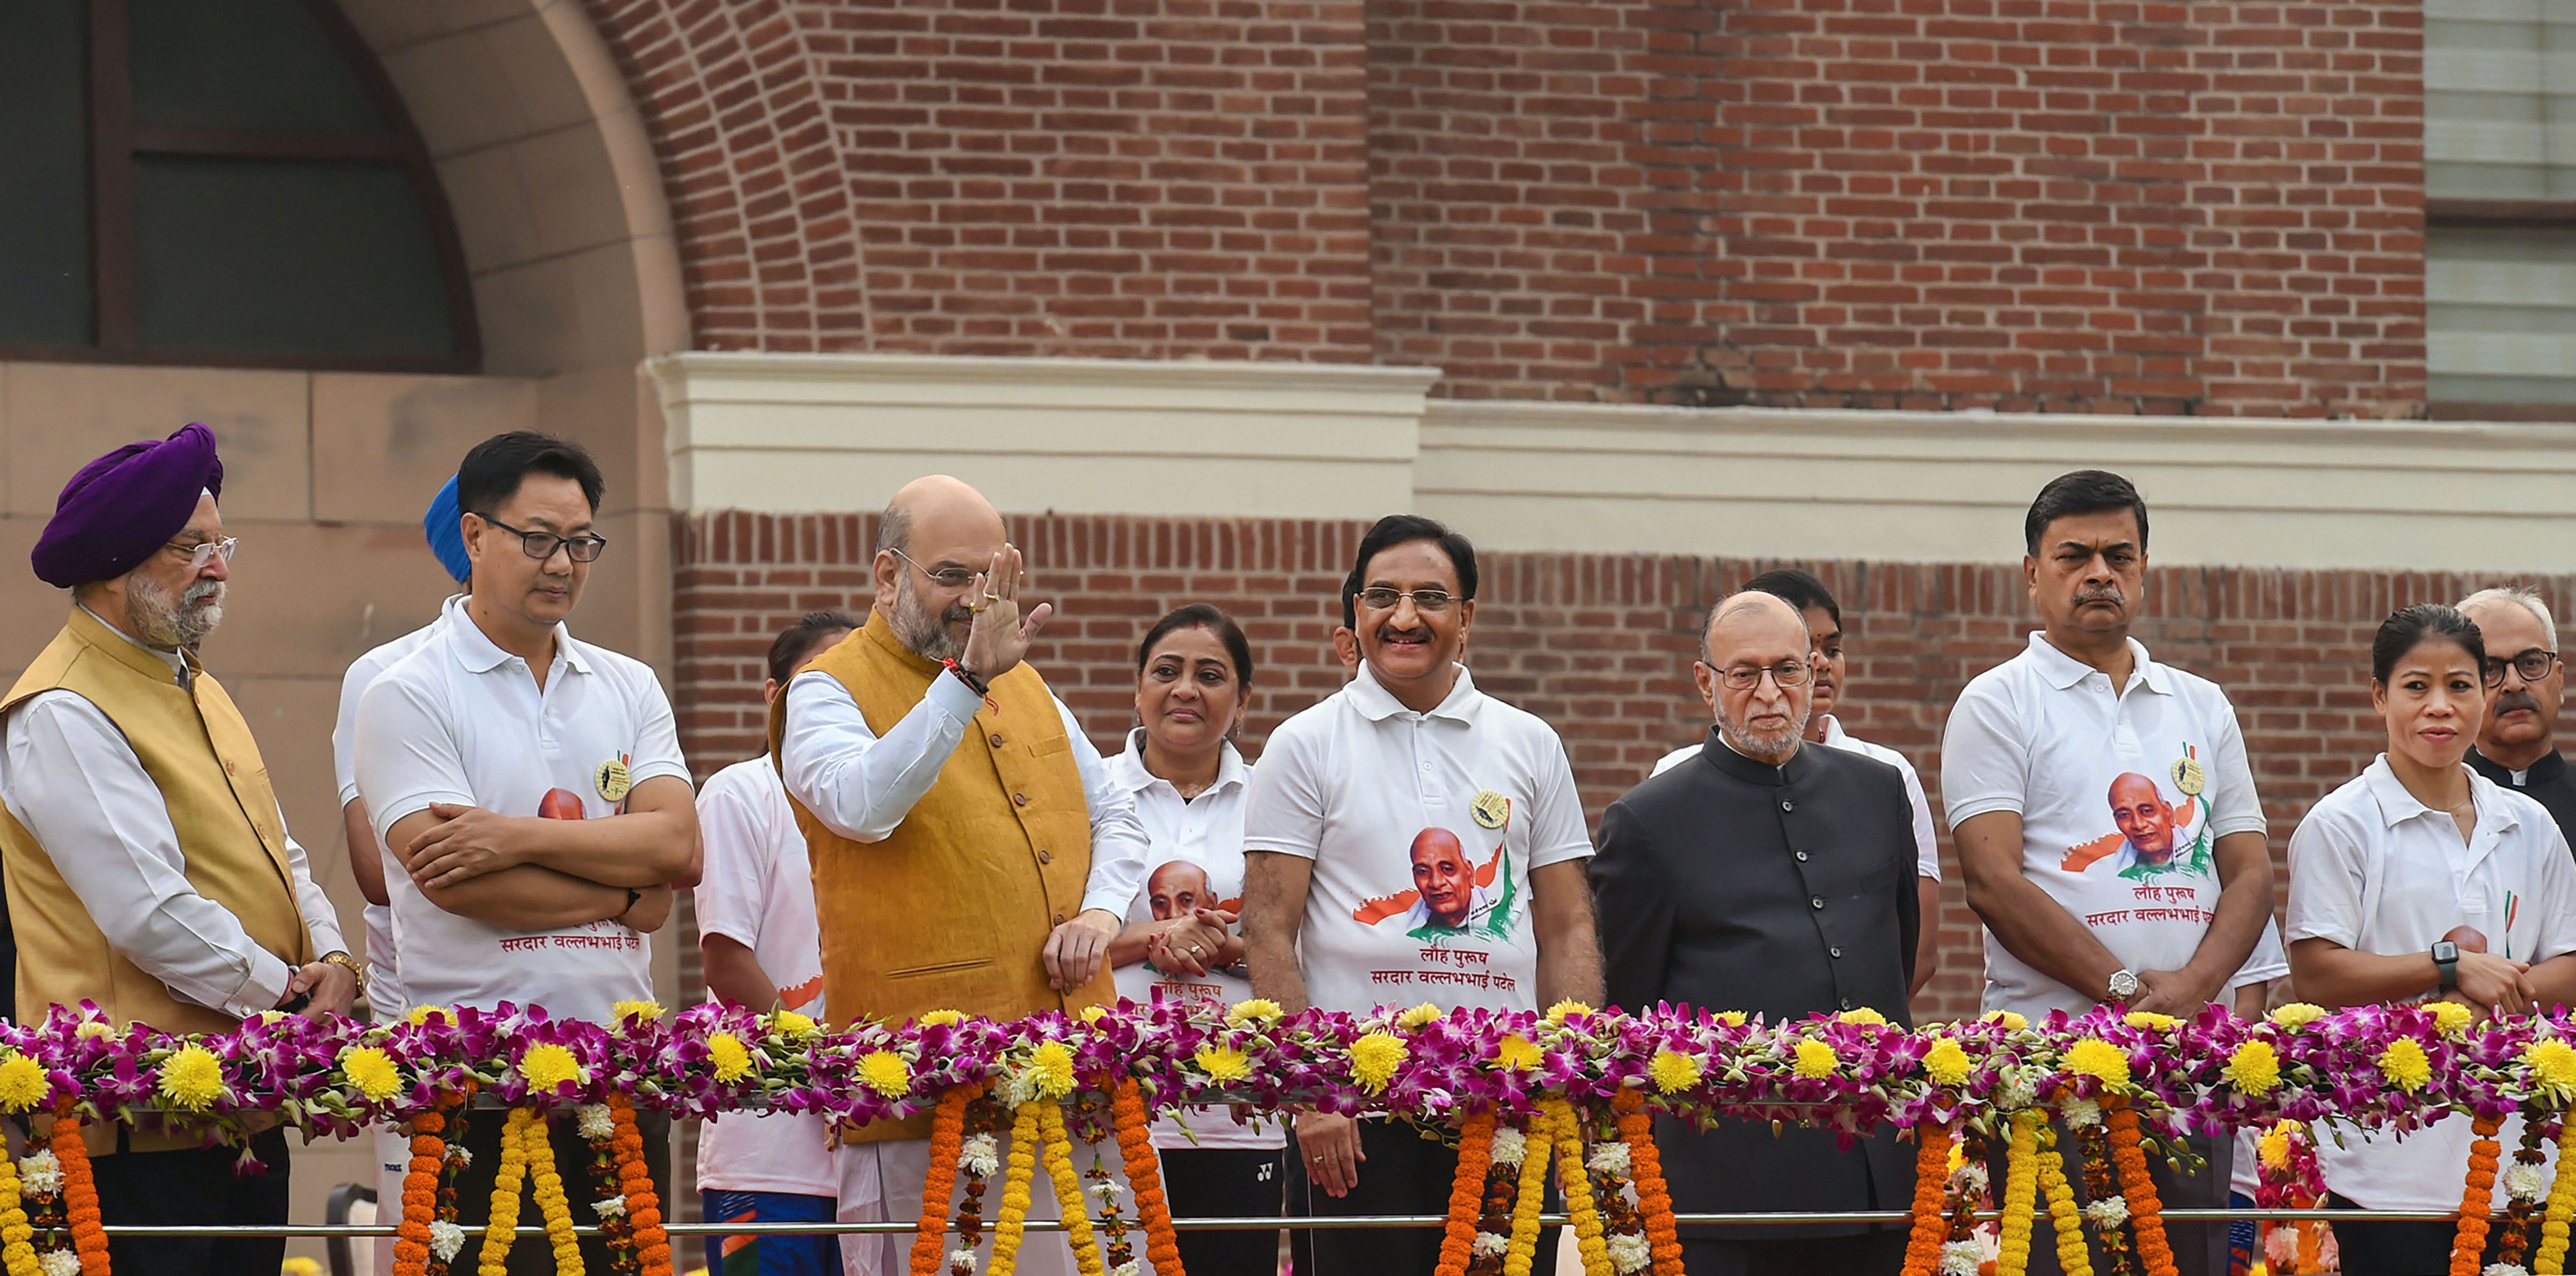 Union Home Minister Amit Shah waves as he flags off the 'Run For Unity' from Delhi's National Stadium on the occasion of 144th birth anniversary of Sardar Vallabhbhai Patel - PTI